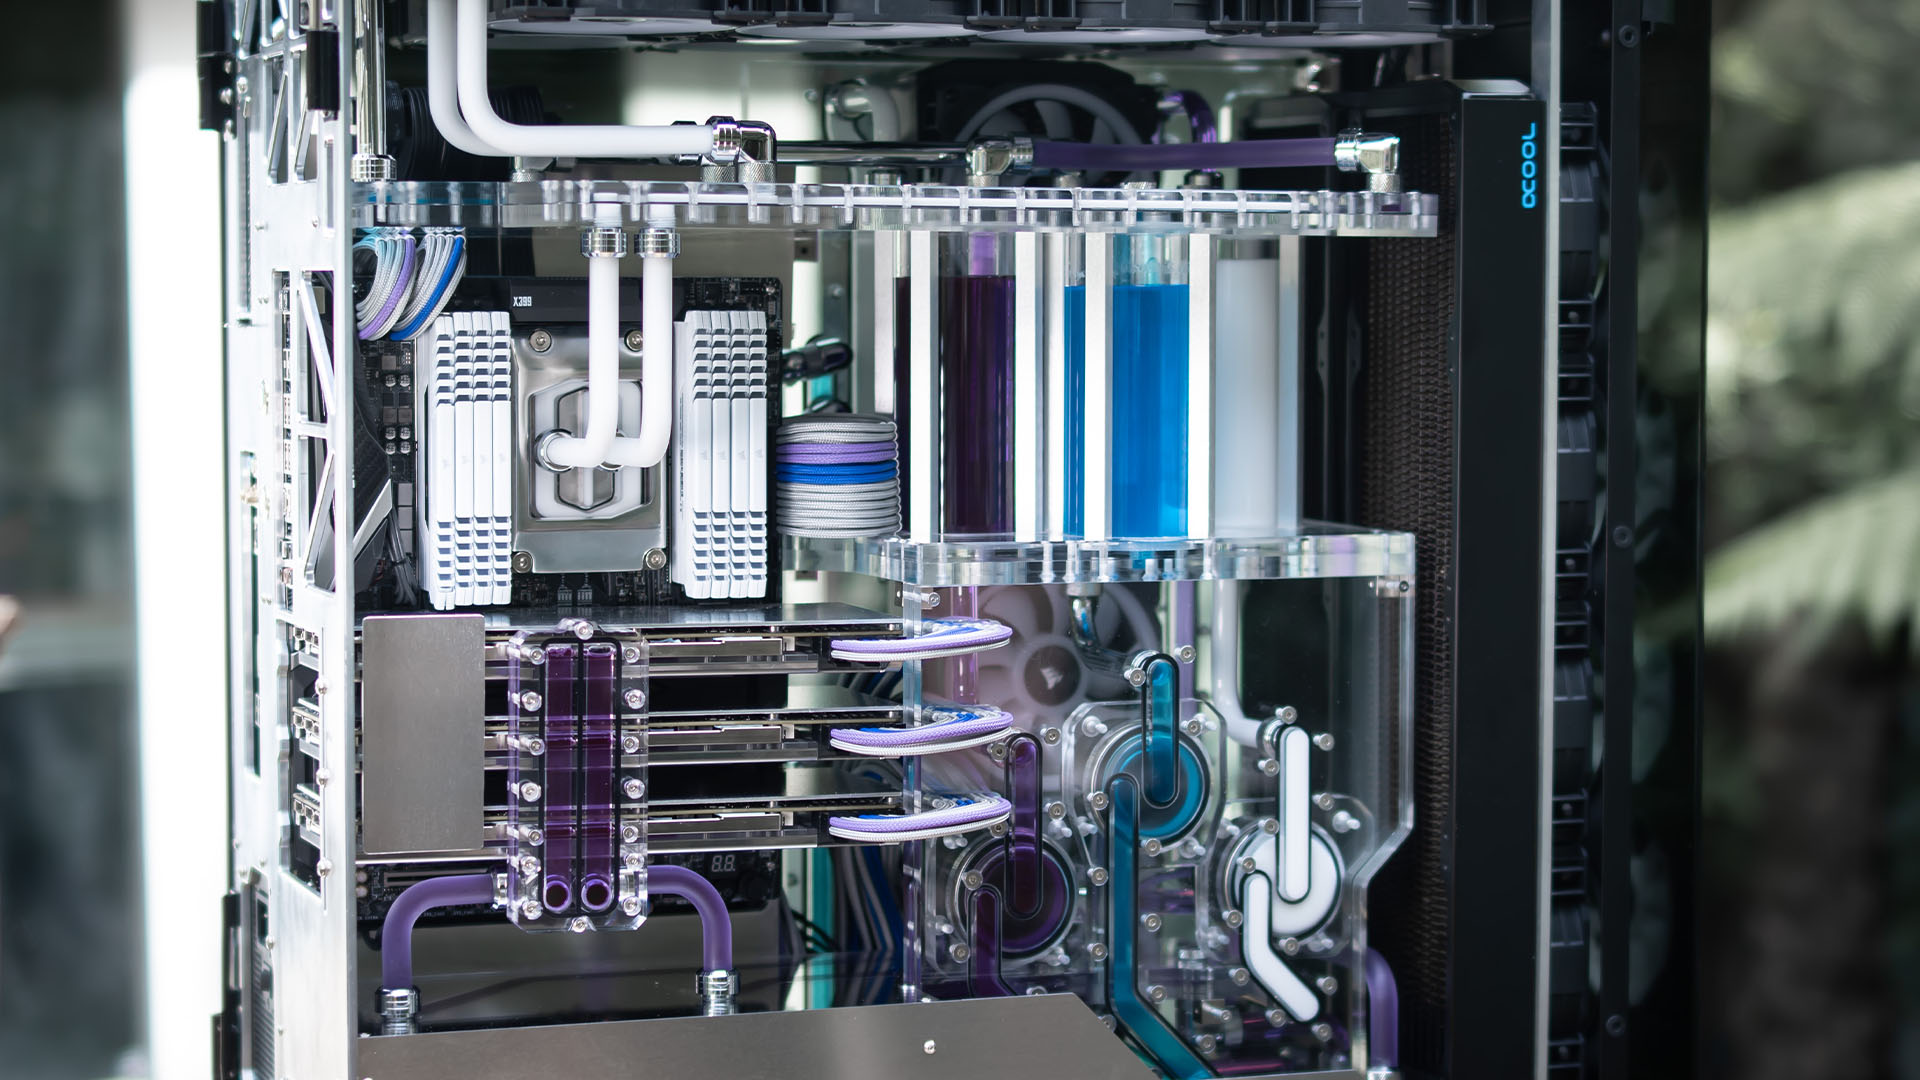 The inside of the dual-system Corsair1000D gaming PC